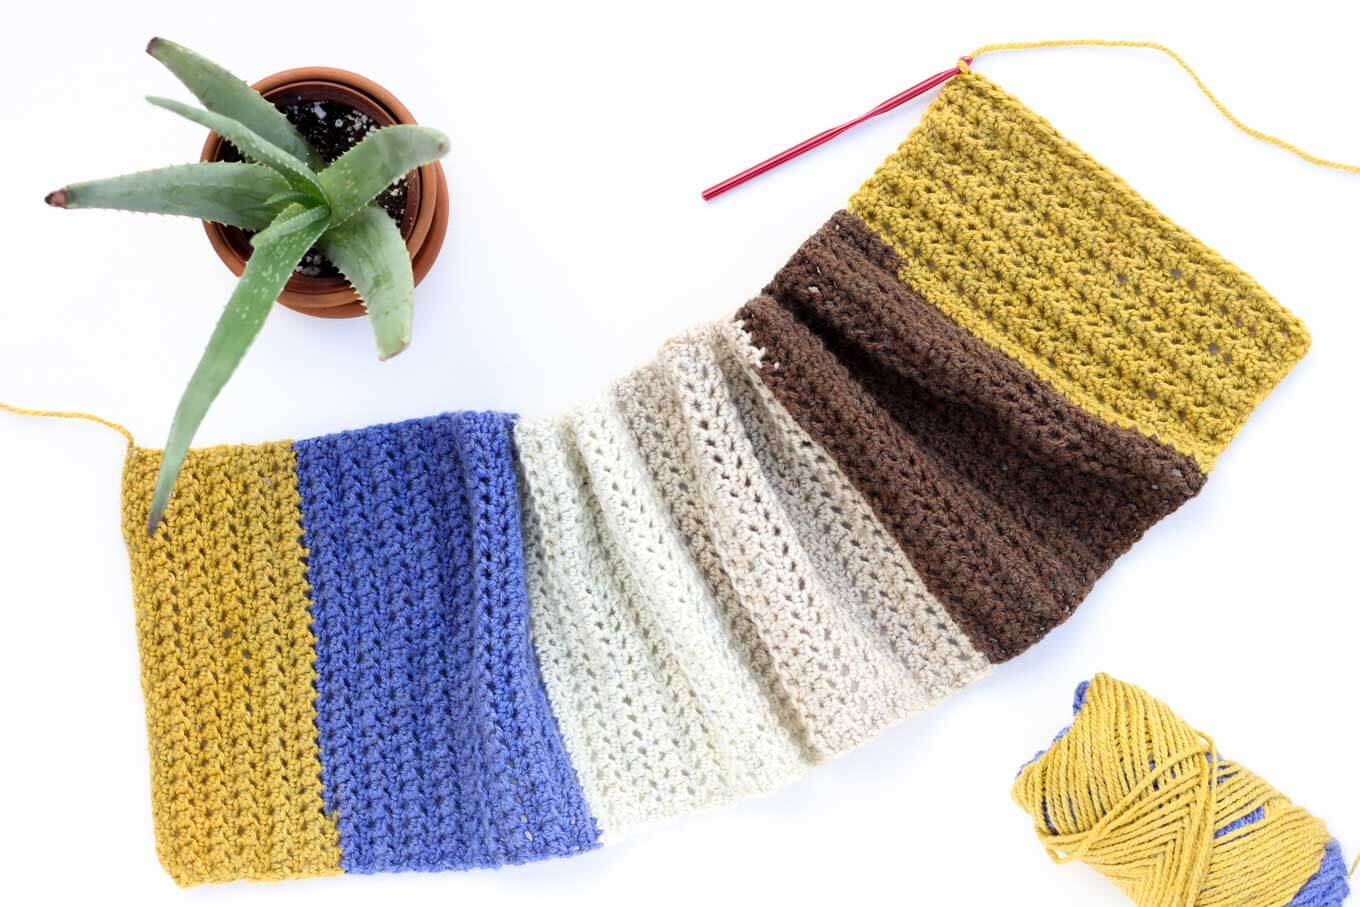 Snood Scarf Crochet Pattern Piece Of Cake Cowl With Caron Cakes Yarn Free Crochet Pattern